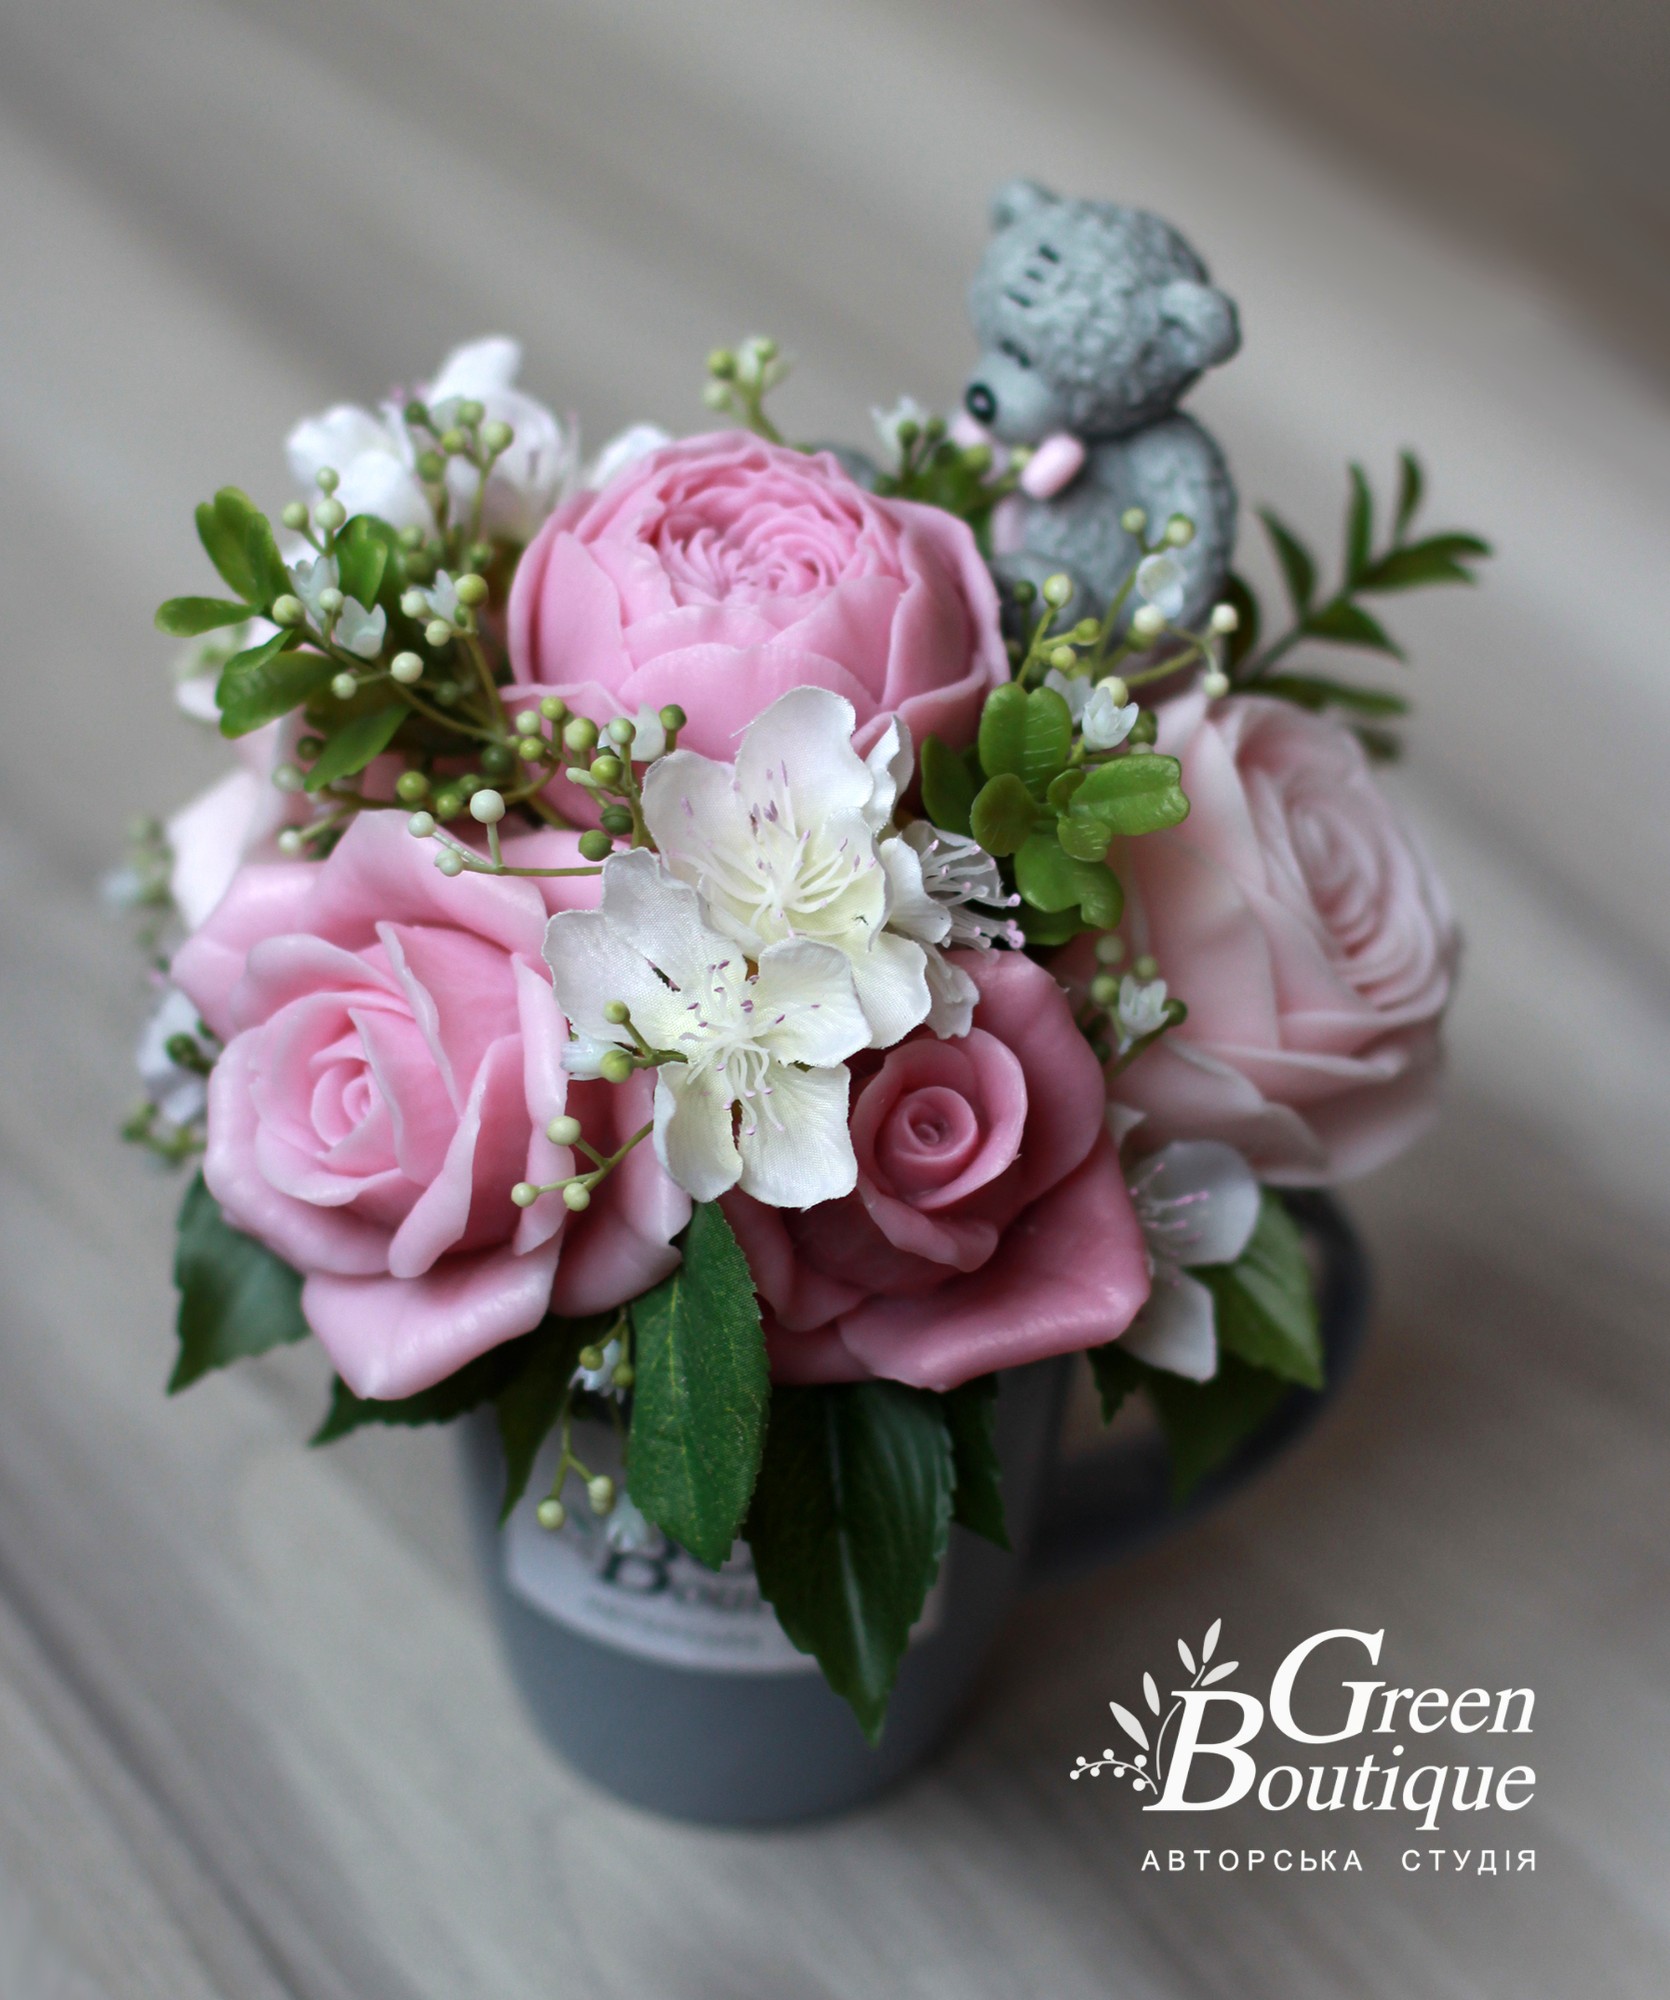 Small interior bouquet with a bear  in a ceramic cup